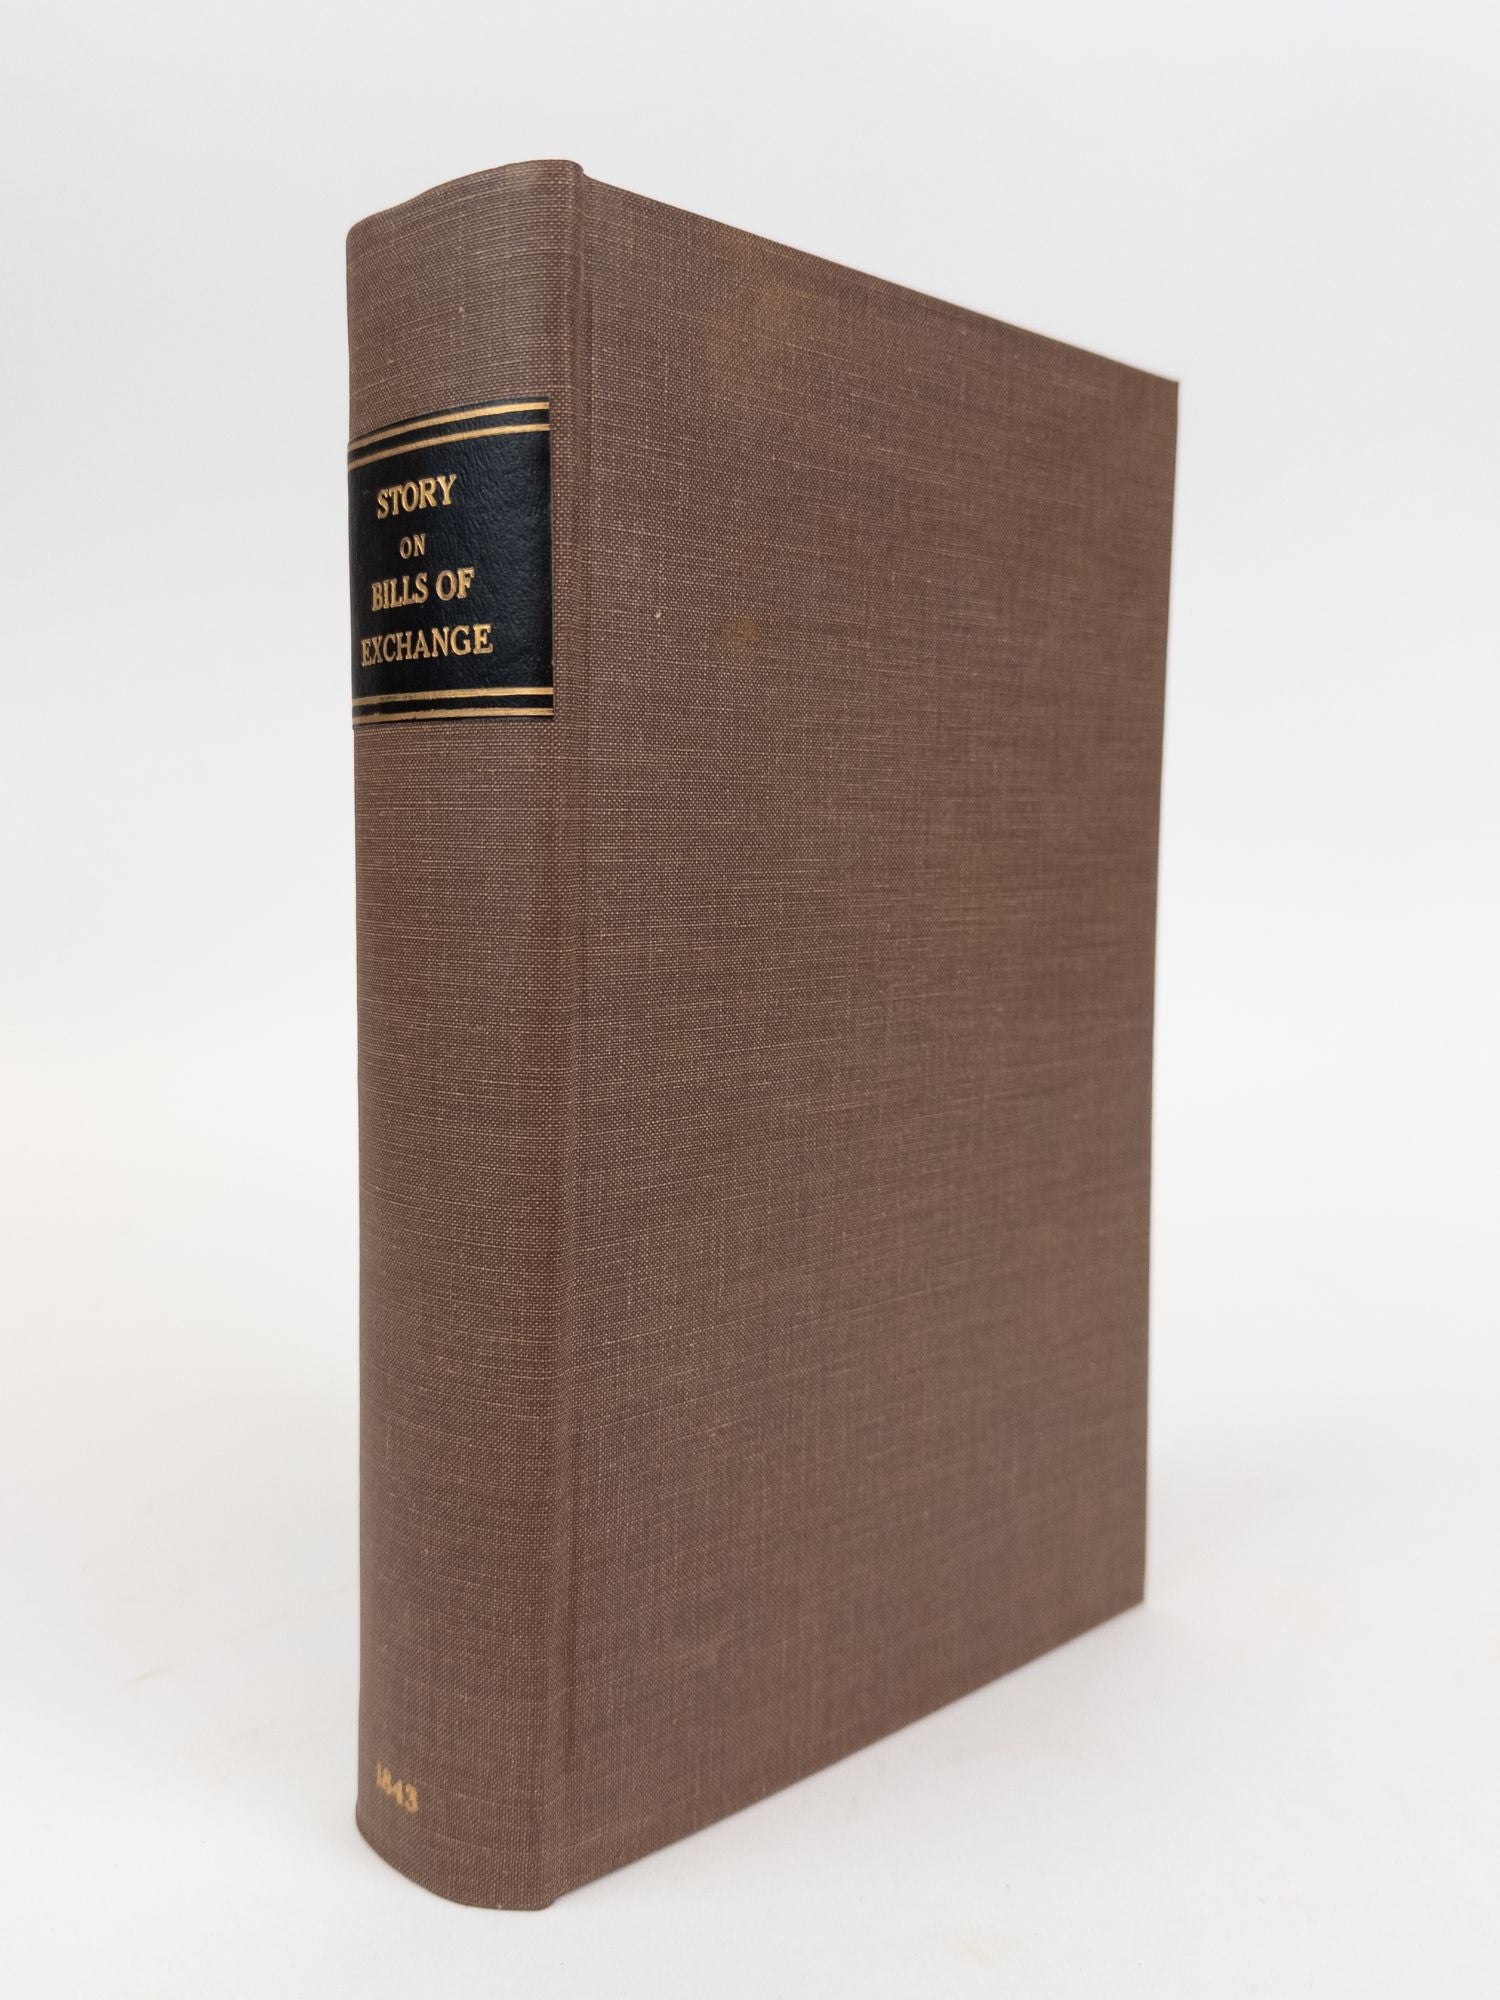 Product Image for COMMENTARIES ON THE LAW OF BILLS OF EXCHANGE, FOREIGN AND INLAND, AS ADMINISTERED IN ENGLAND AND AMERICA; WITH OCCASIONAL ILLUSTRATIONS FROM THE COMMERCIAL LAW OF THE NATIONS OF CONTINENTAL EUROPE